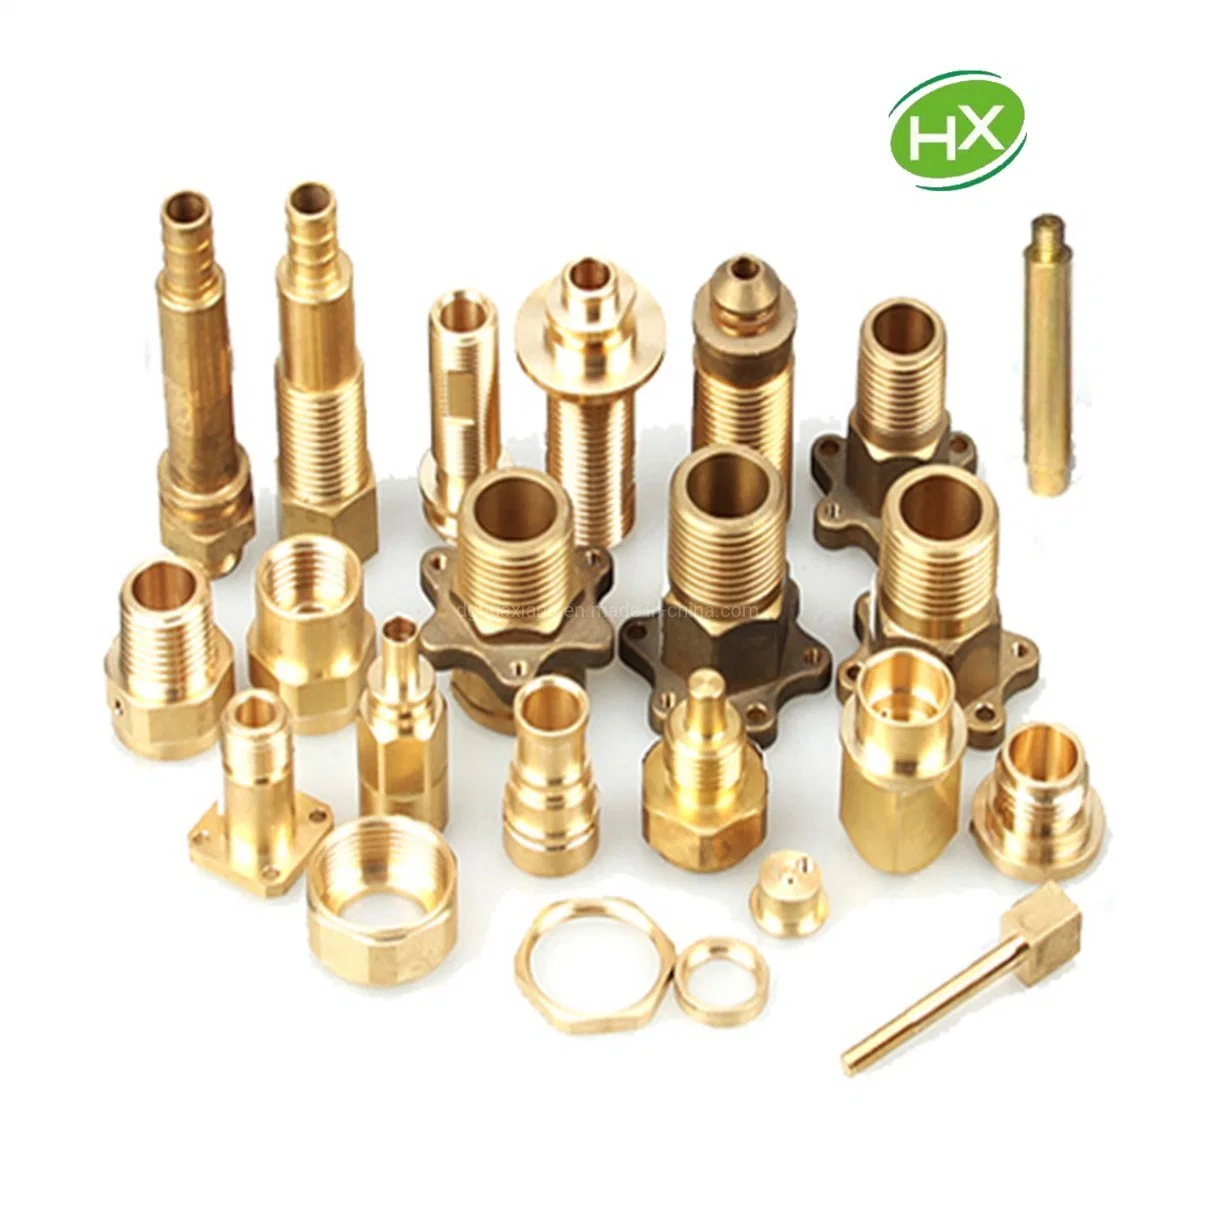 Custom Precision Brass and Copper Metal Parts Turning Milling CNC Machining Parts